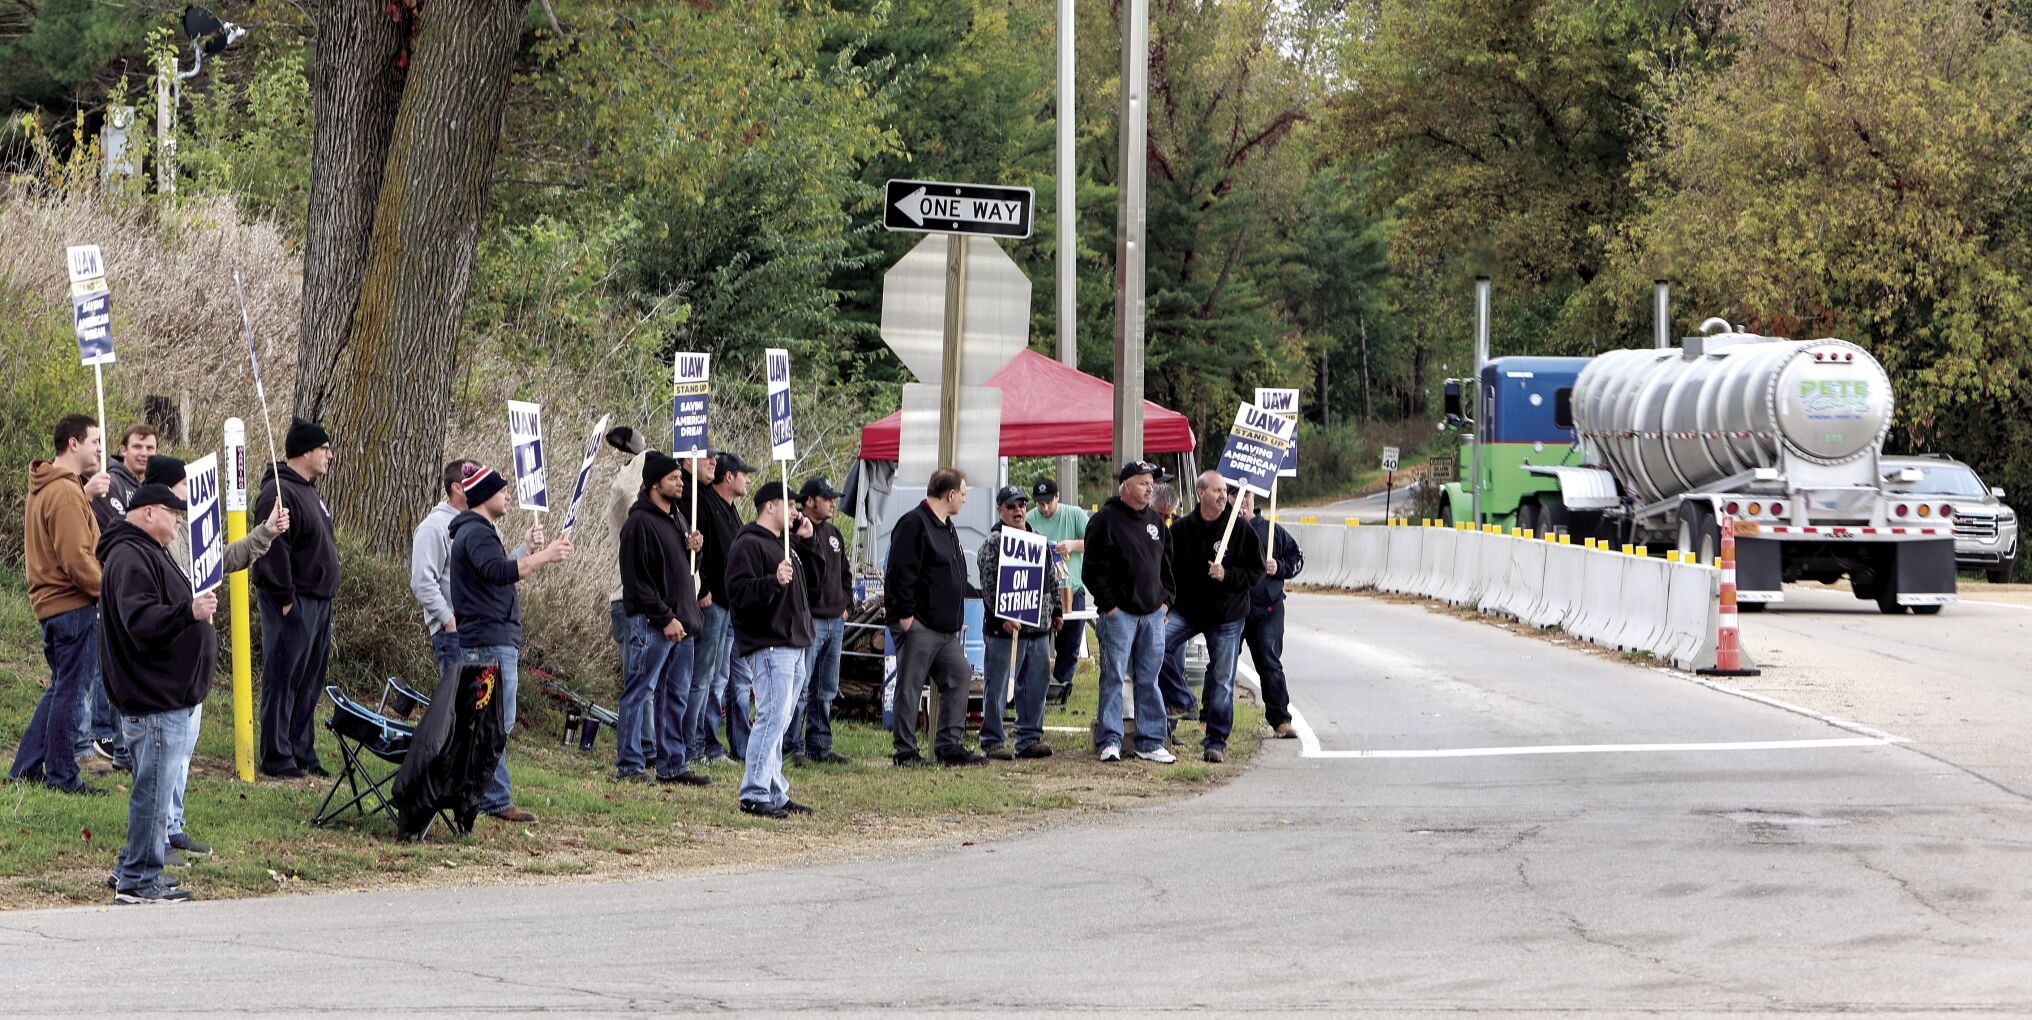 Union employees for East Dubuque Nitrogen Fertilizers LLC, of East Dubuque, Ill., strike near the plant’s entrance along U.S. 20 on Wednesday.    PHOTO CREDIT: Dave Kettering